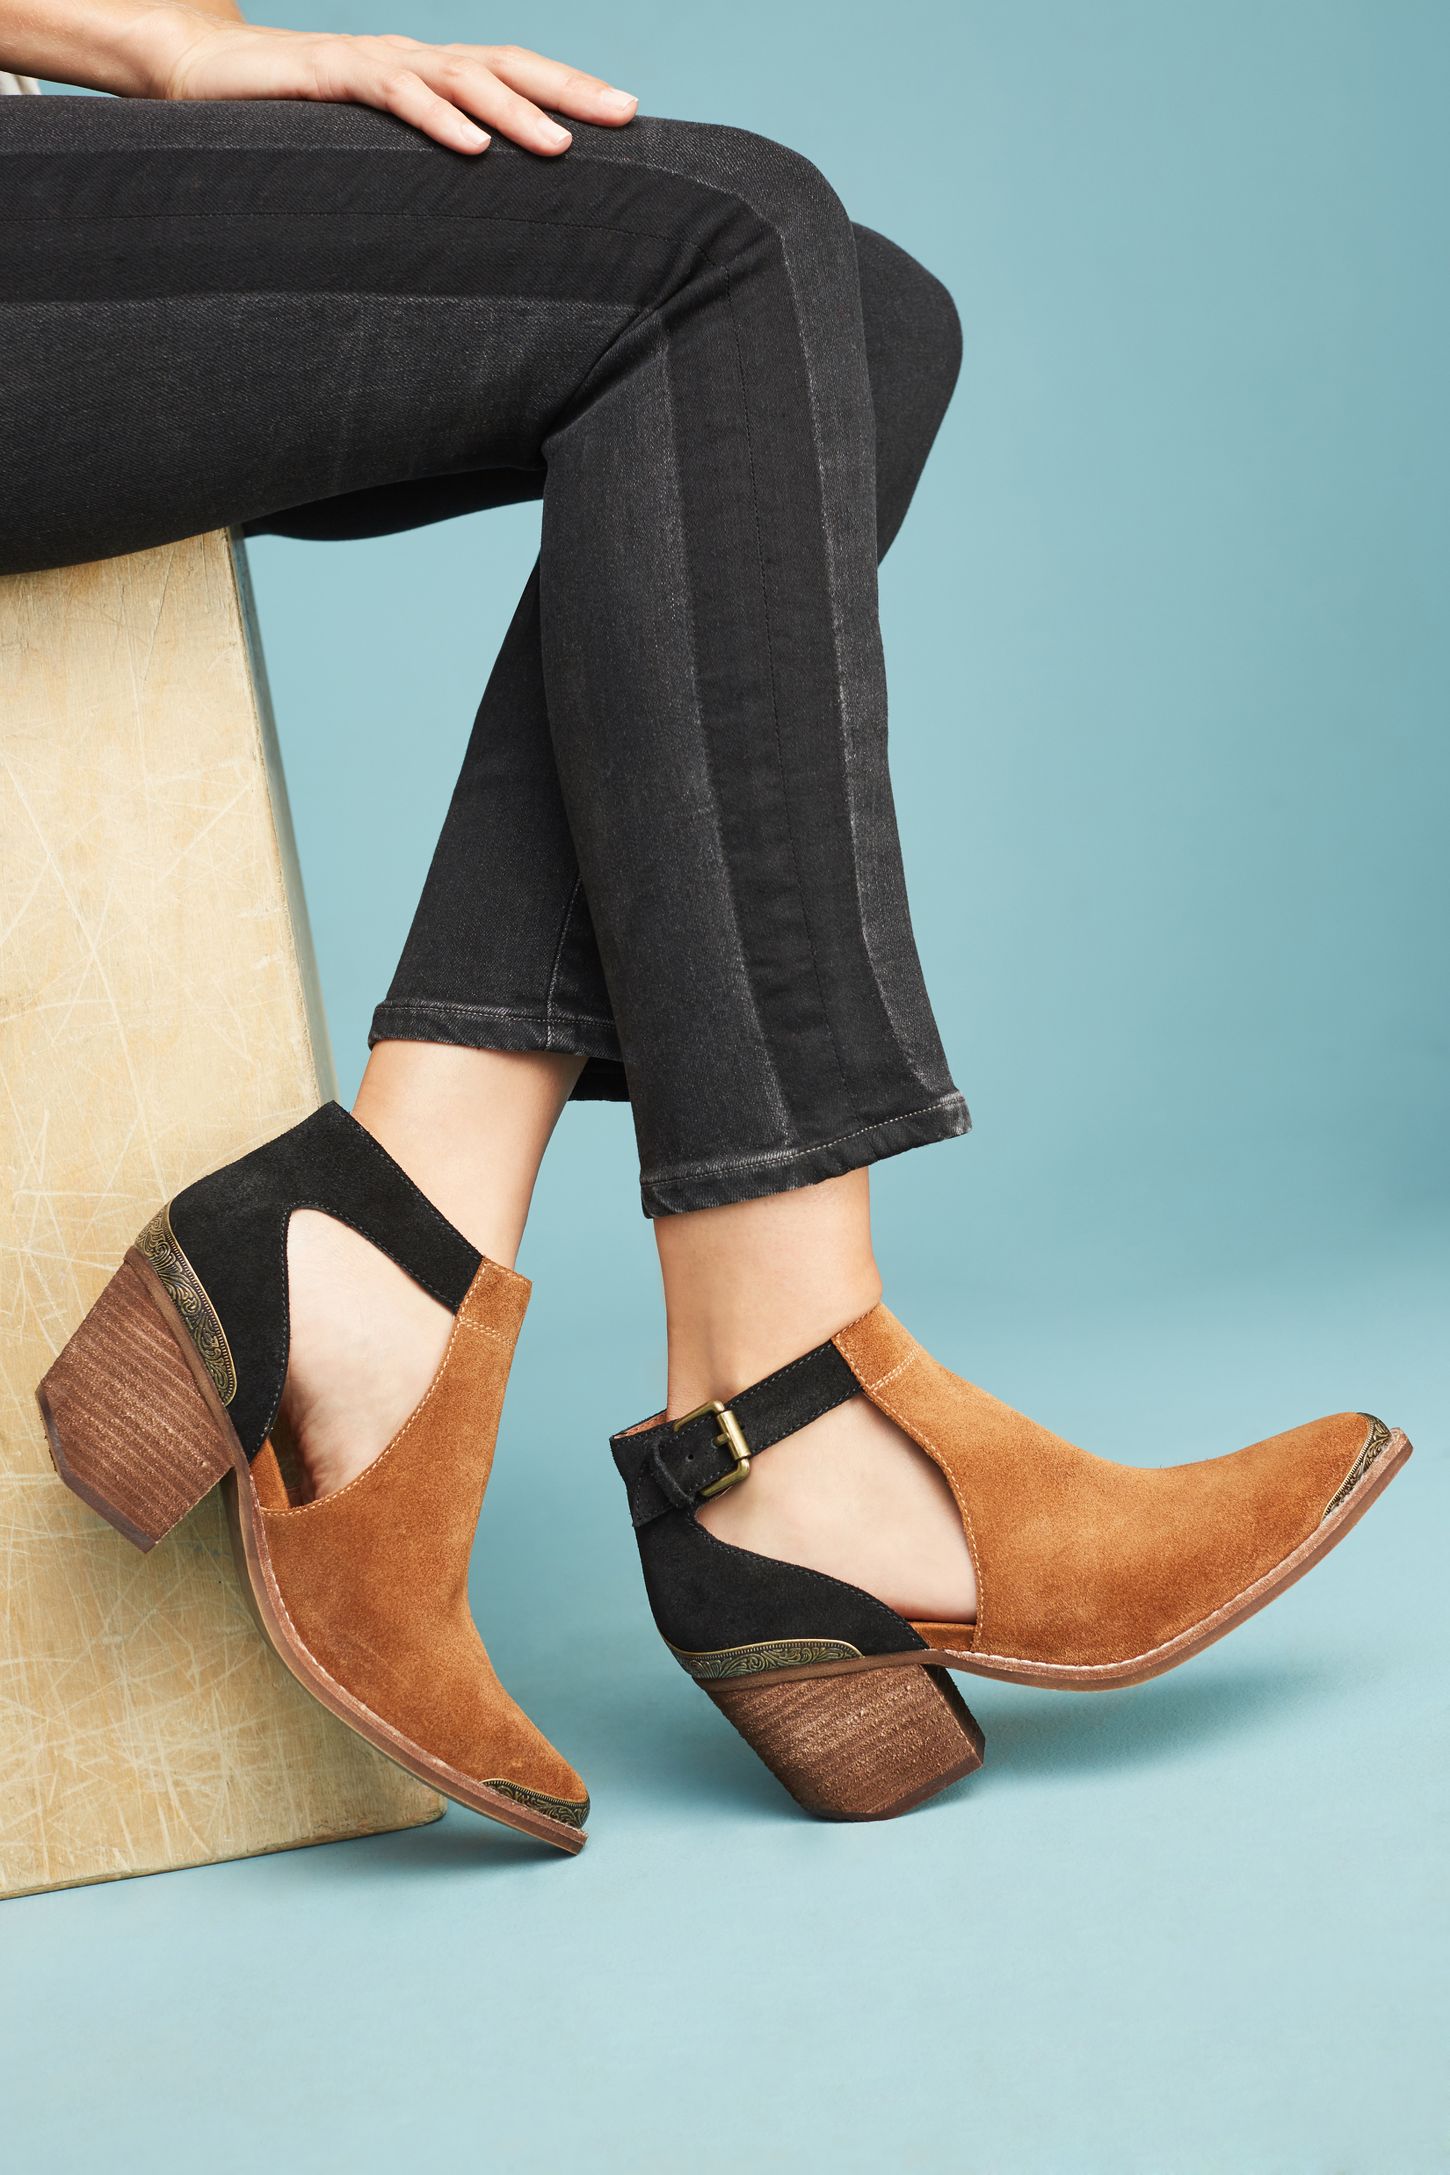 Jeffrey Campbell Woodruff Cutout Ankle Booties | Anthropologie